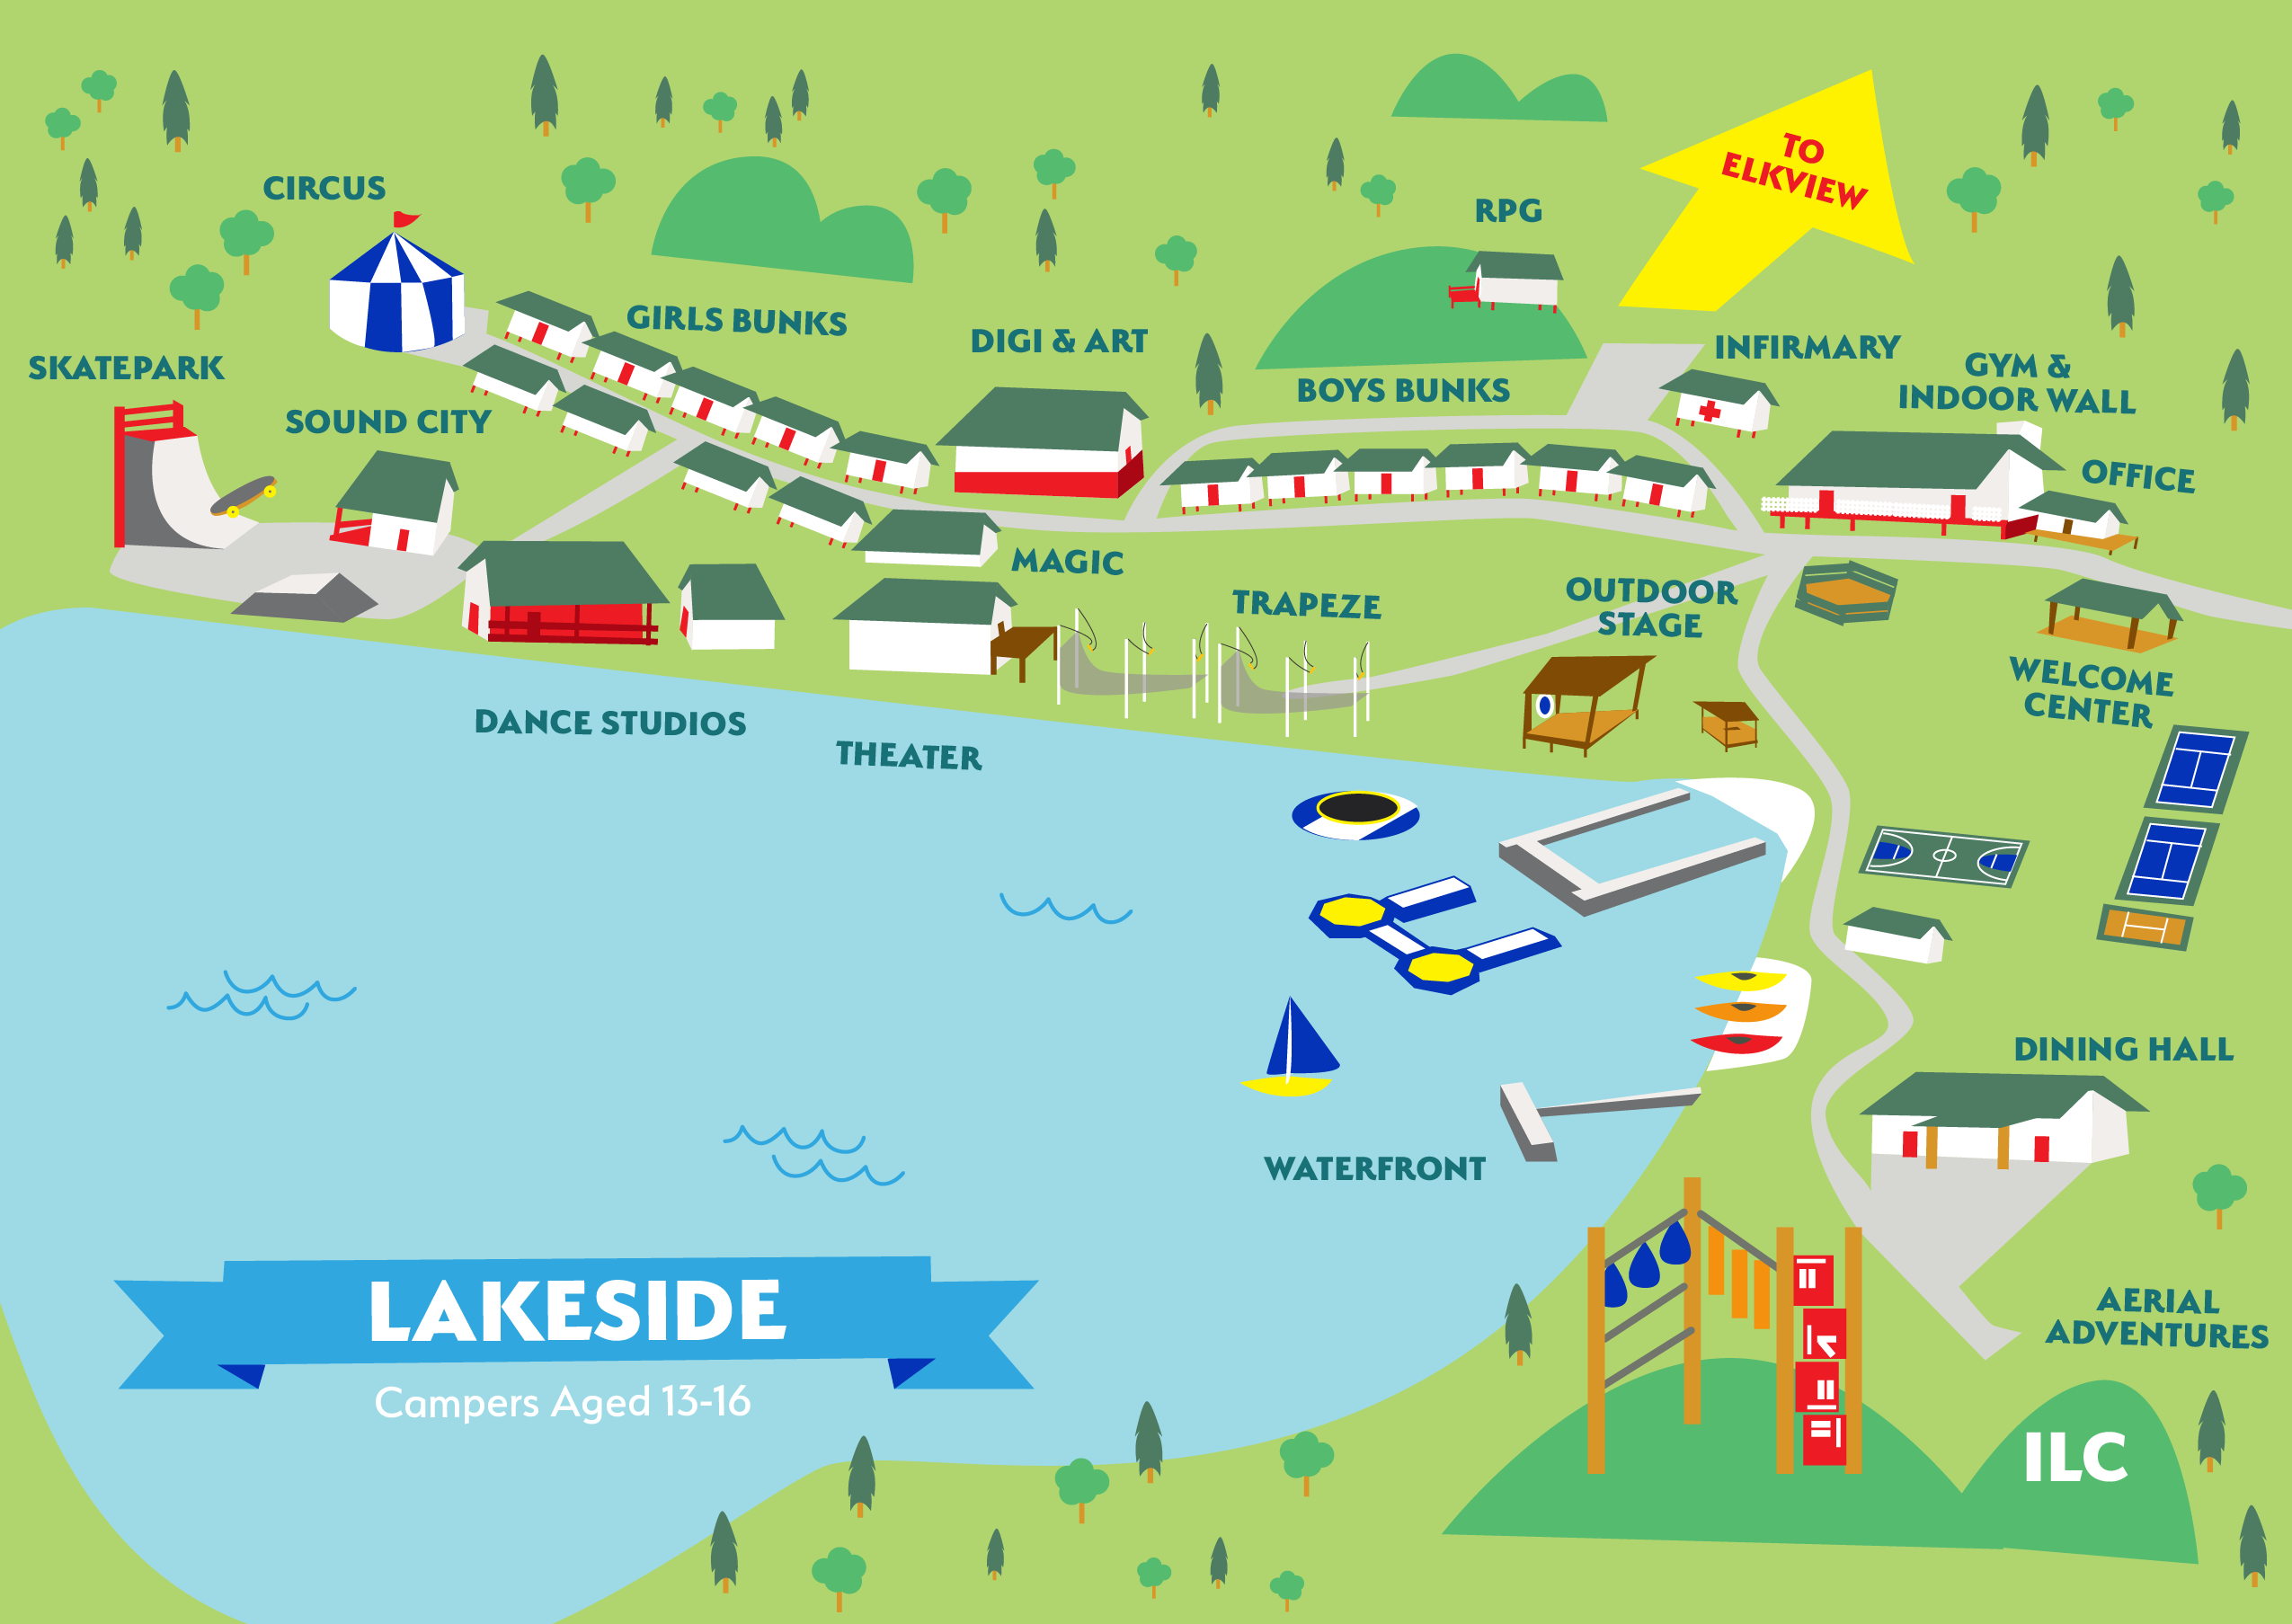 Map of Lakeside part of ILC campus